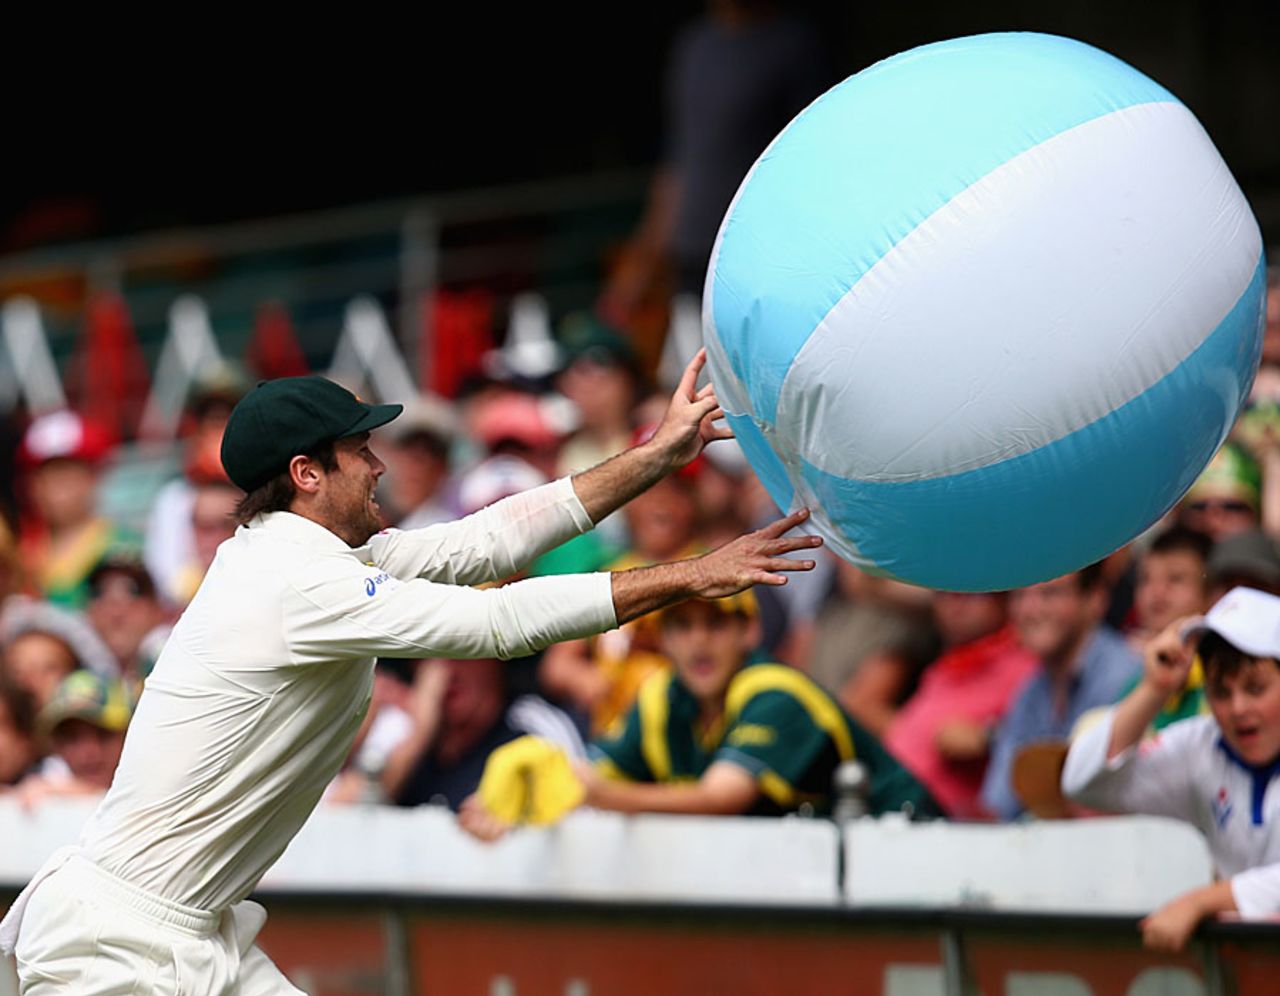 Rob Quiney pushes back a beach ball that had accidentally come onto the field, Australia v South Africa, 1st Test, 3rd day, Brisbane, November 11, 2012